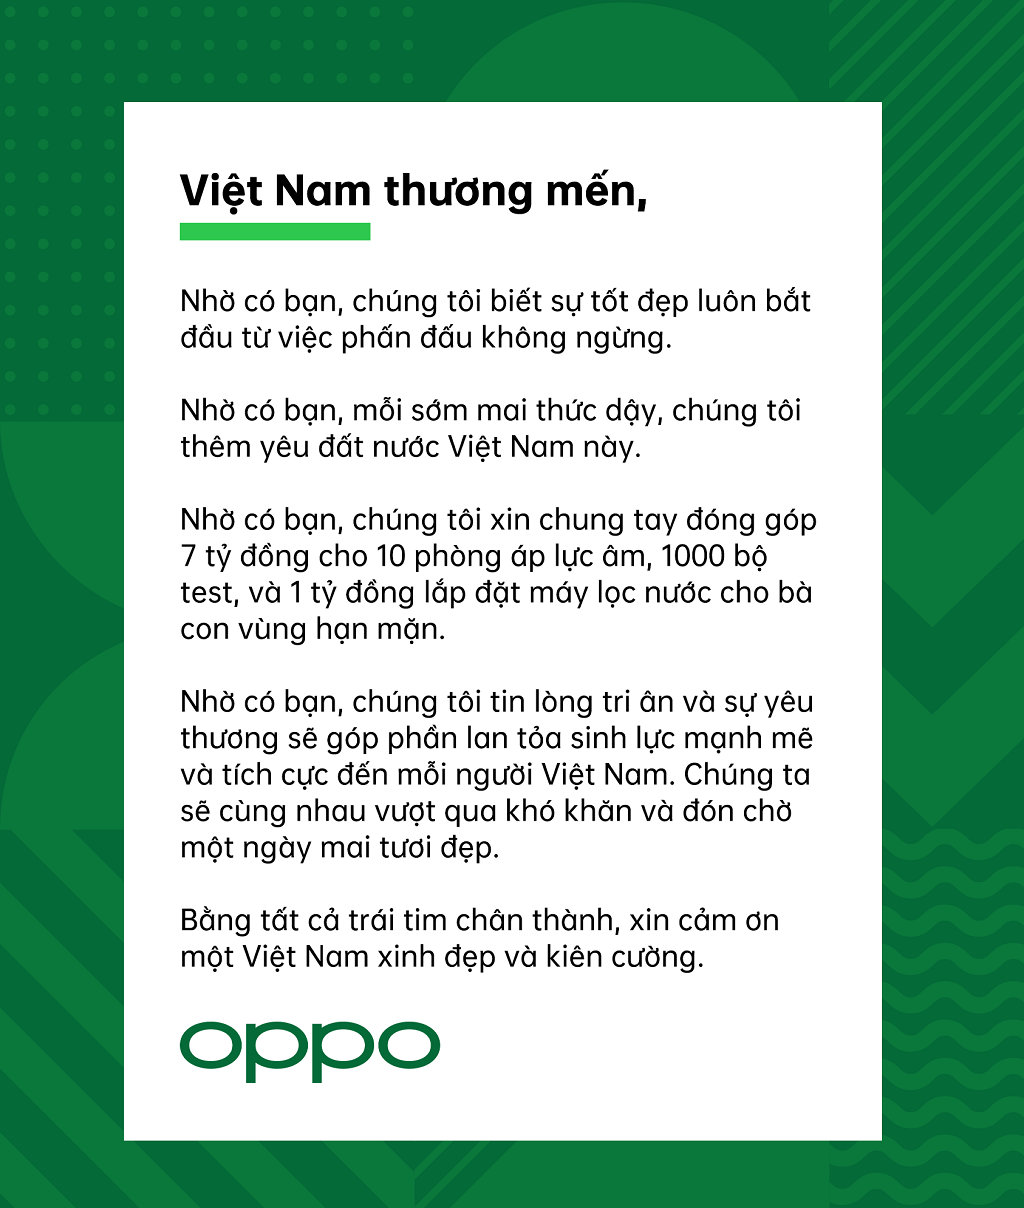 oppo-letter.png